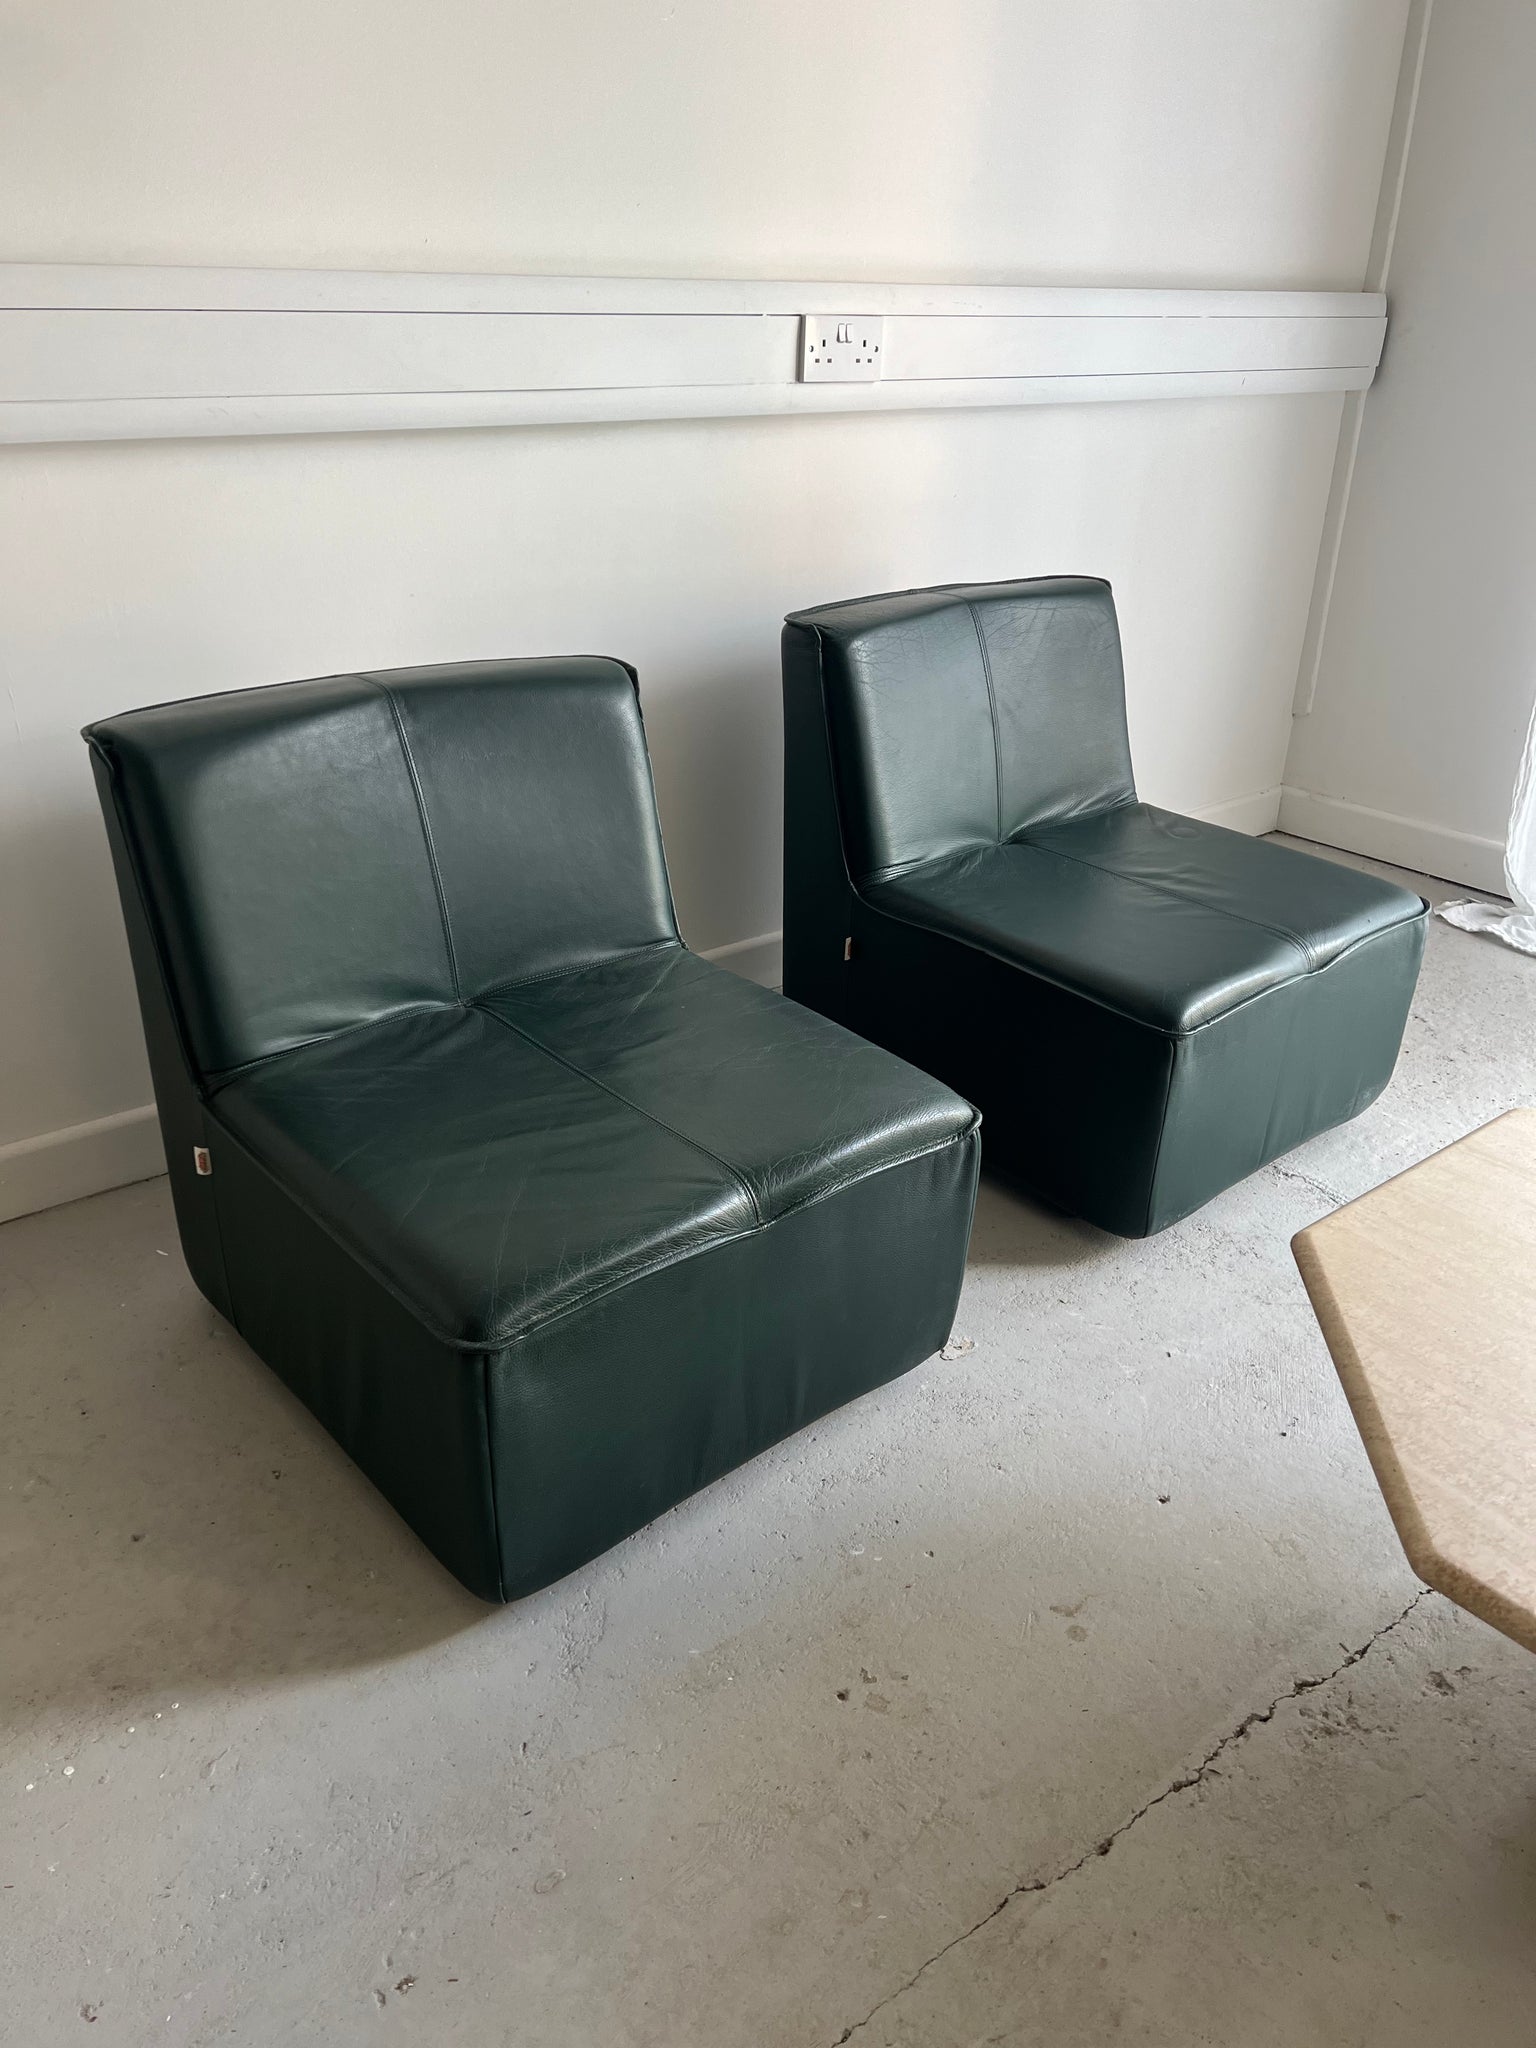 Vintage Green Leather Armchairs